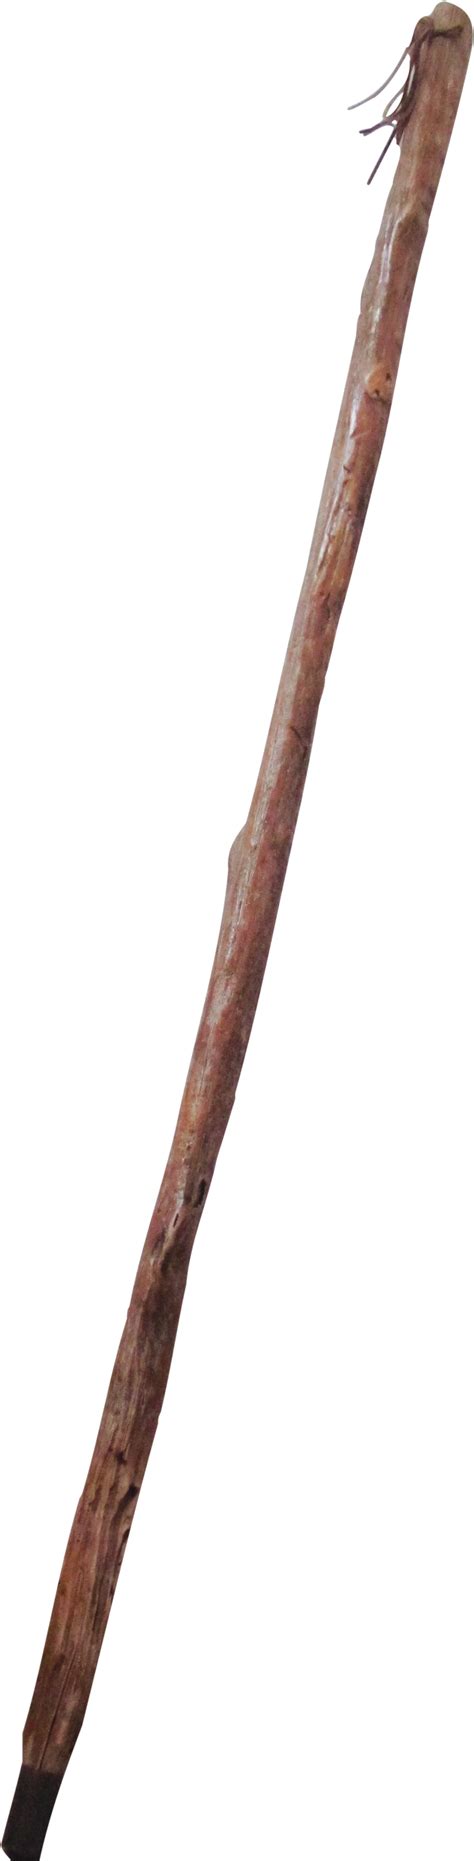 Walking Stick Png Isolated Transparent Picture Png Mart